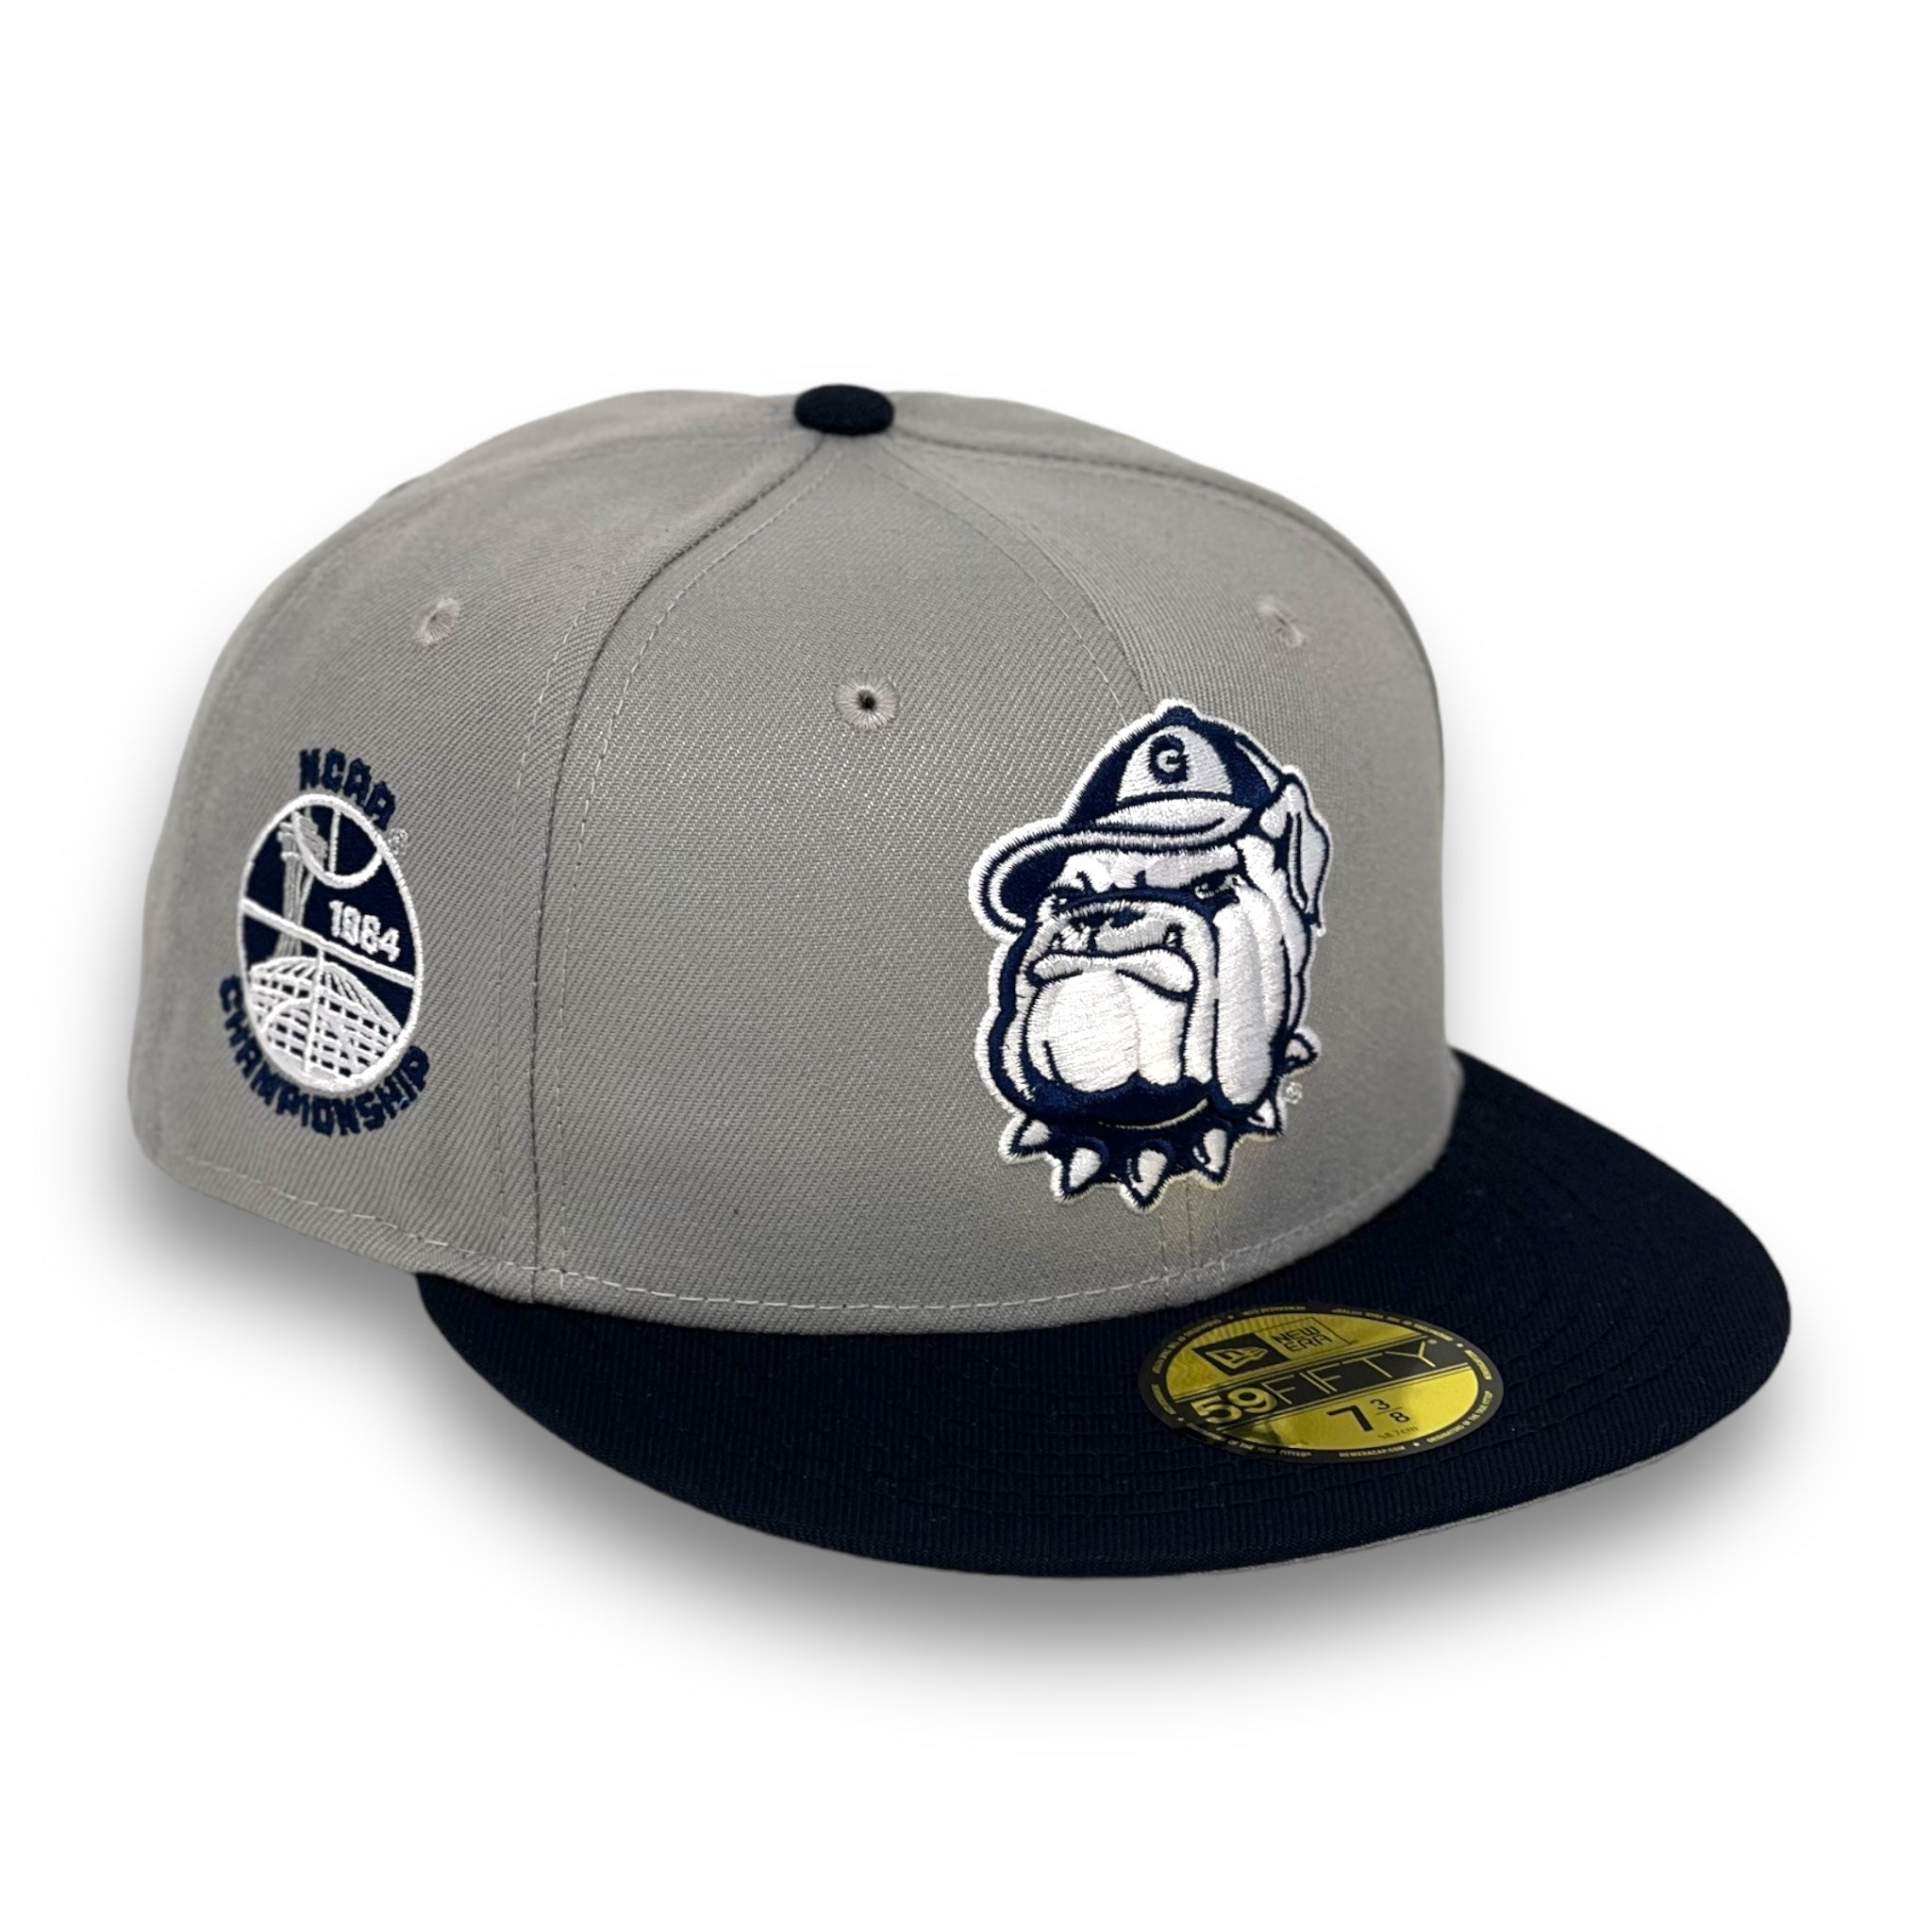 GEORGETOWN HOYAS (2-TONE) (1984 CHAMPIONSHIP) NEW ERA 59FIFTY FITTED